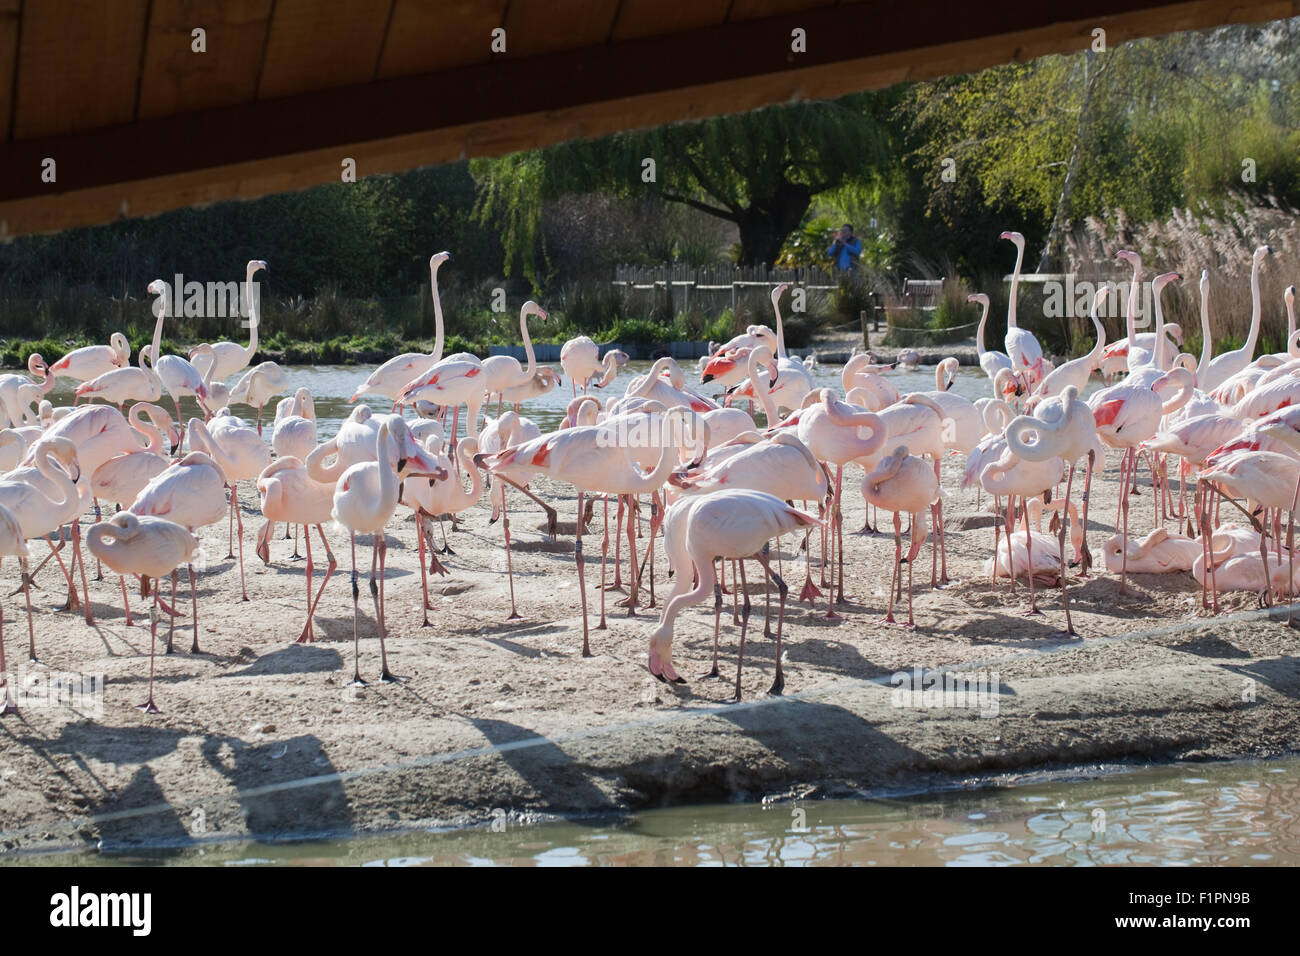 Greater Flamingos (Phoenicopterus roseus),  section of a flock of 260 birds - on view for human visitors. WWT Slimbridge, UK. Stock Photo